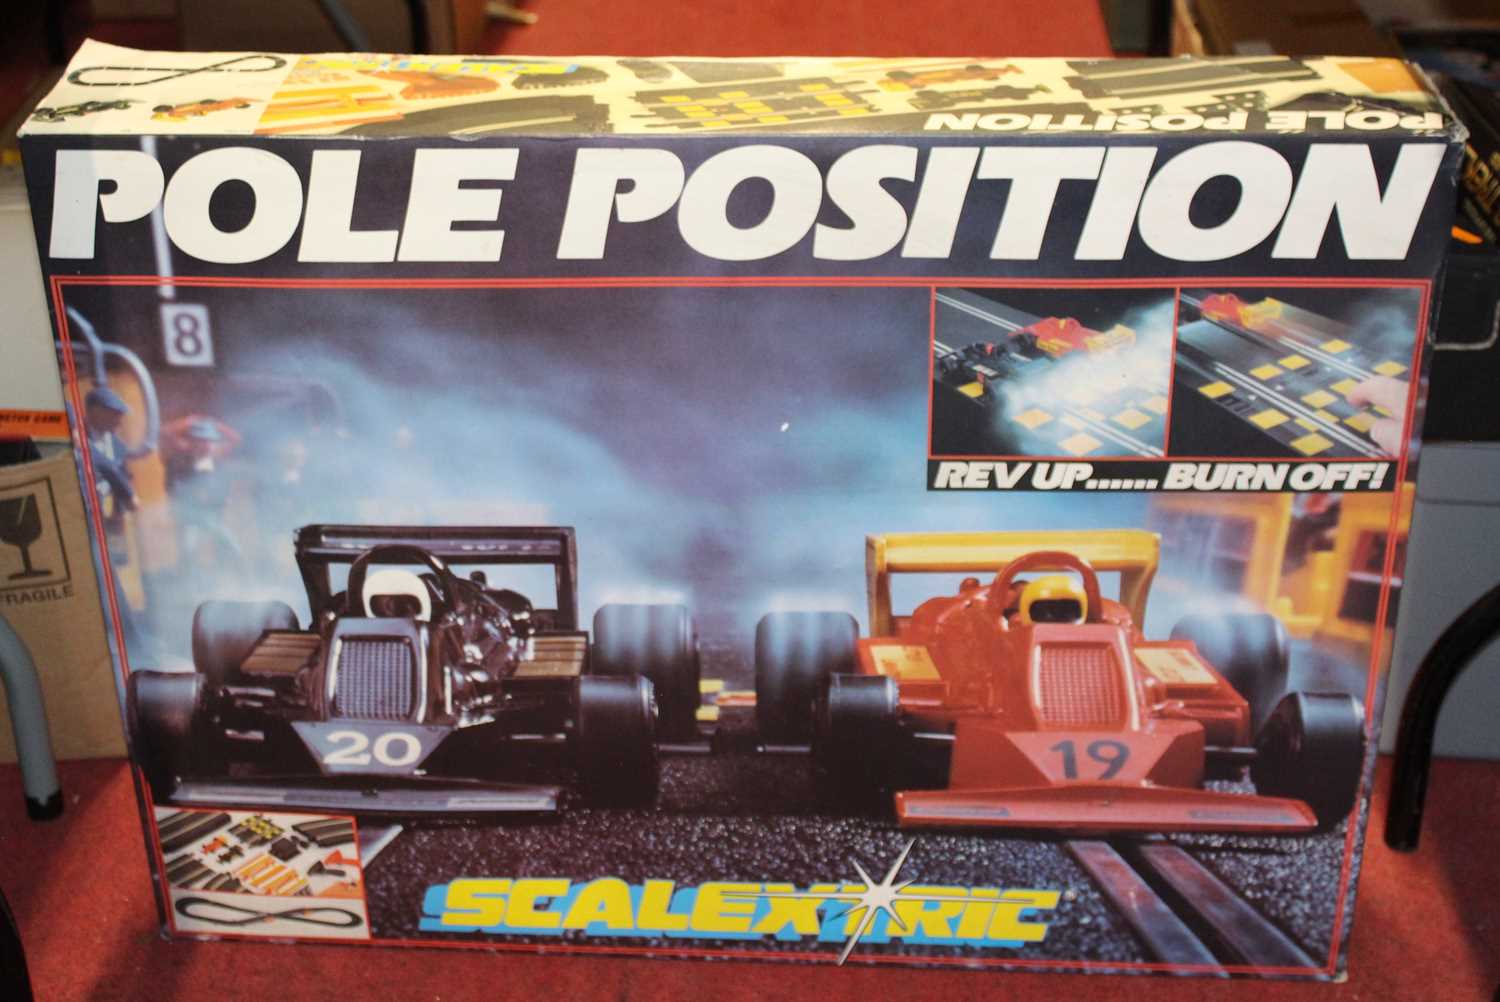 A Scalextric No. 370/1526 Pole Position slot racing set, housed in the original polystyrene packed - Image 3 of 3